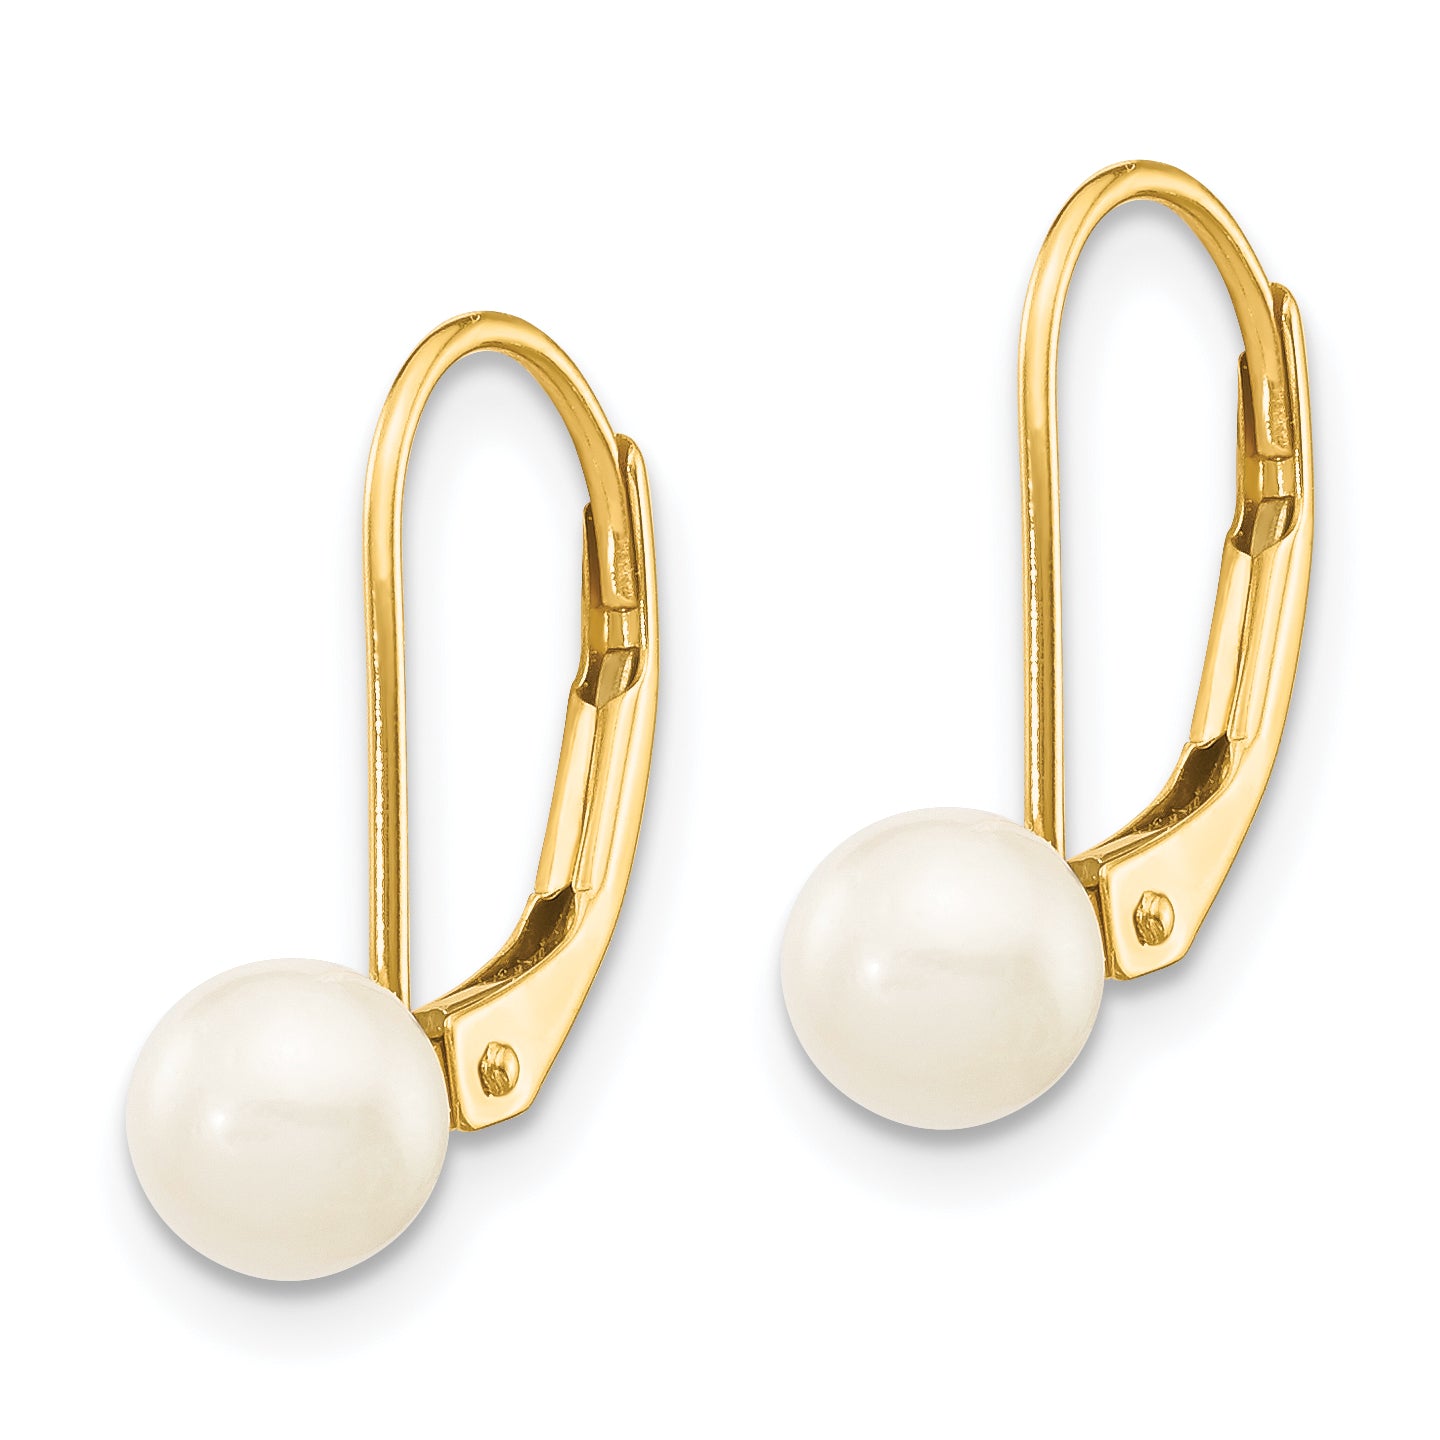 14k 5-6mm White Round Saltwater Akoya Cultured Pearl Leverback Earrings